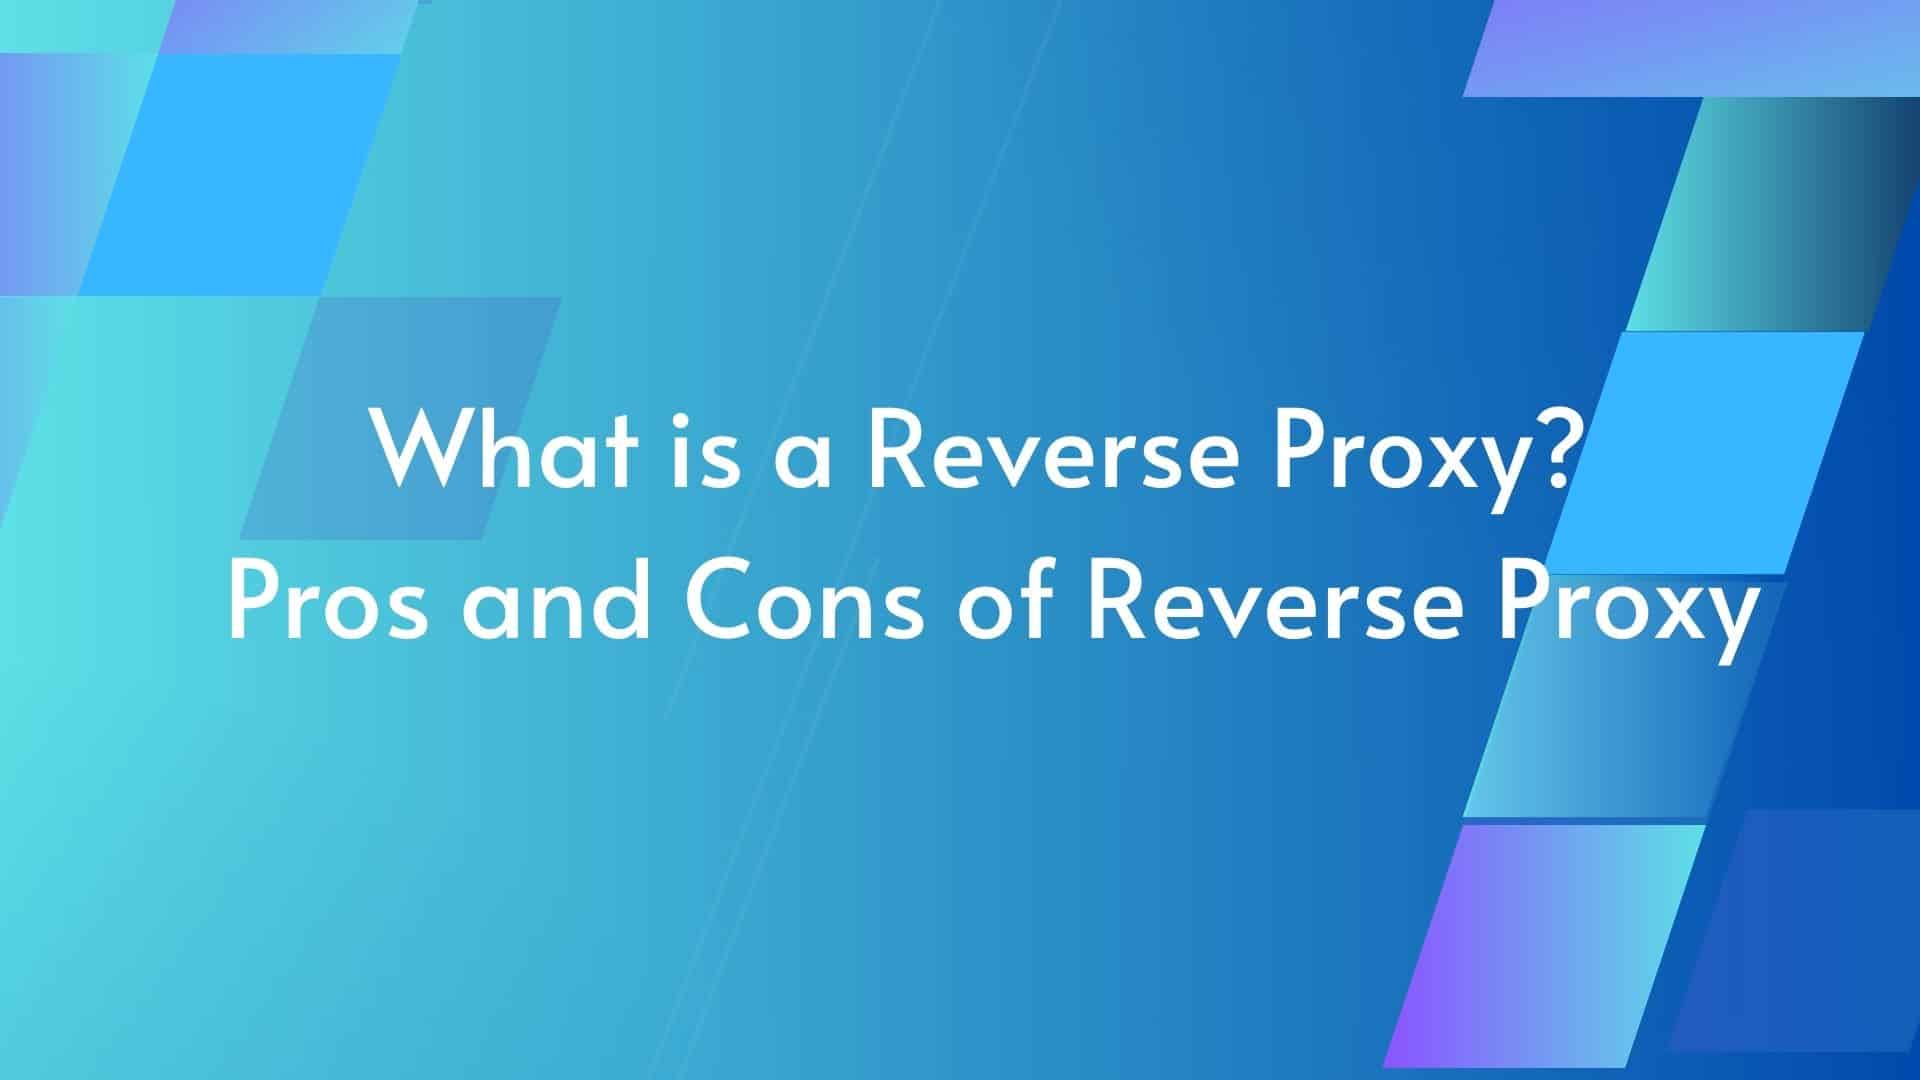 What is a Reverse Proxy? Pros and Cons of Reverse Proxy